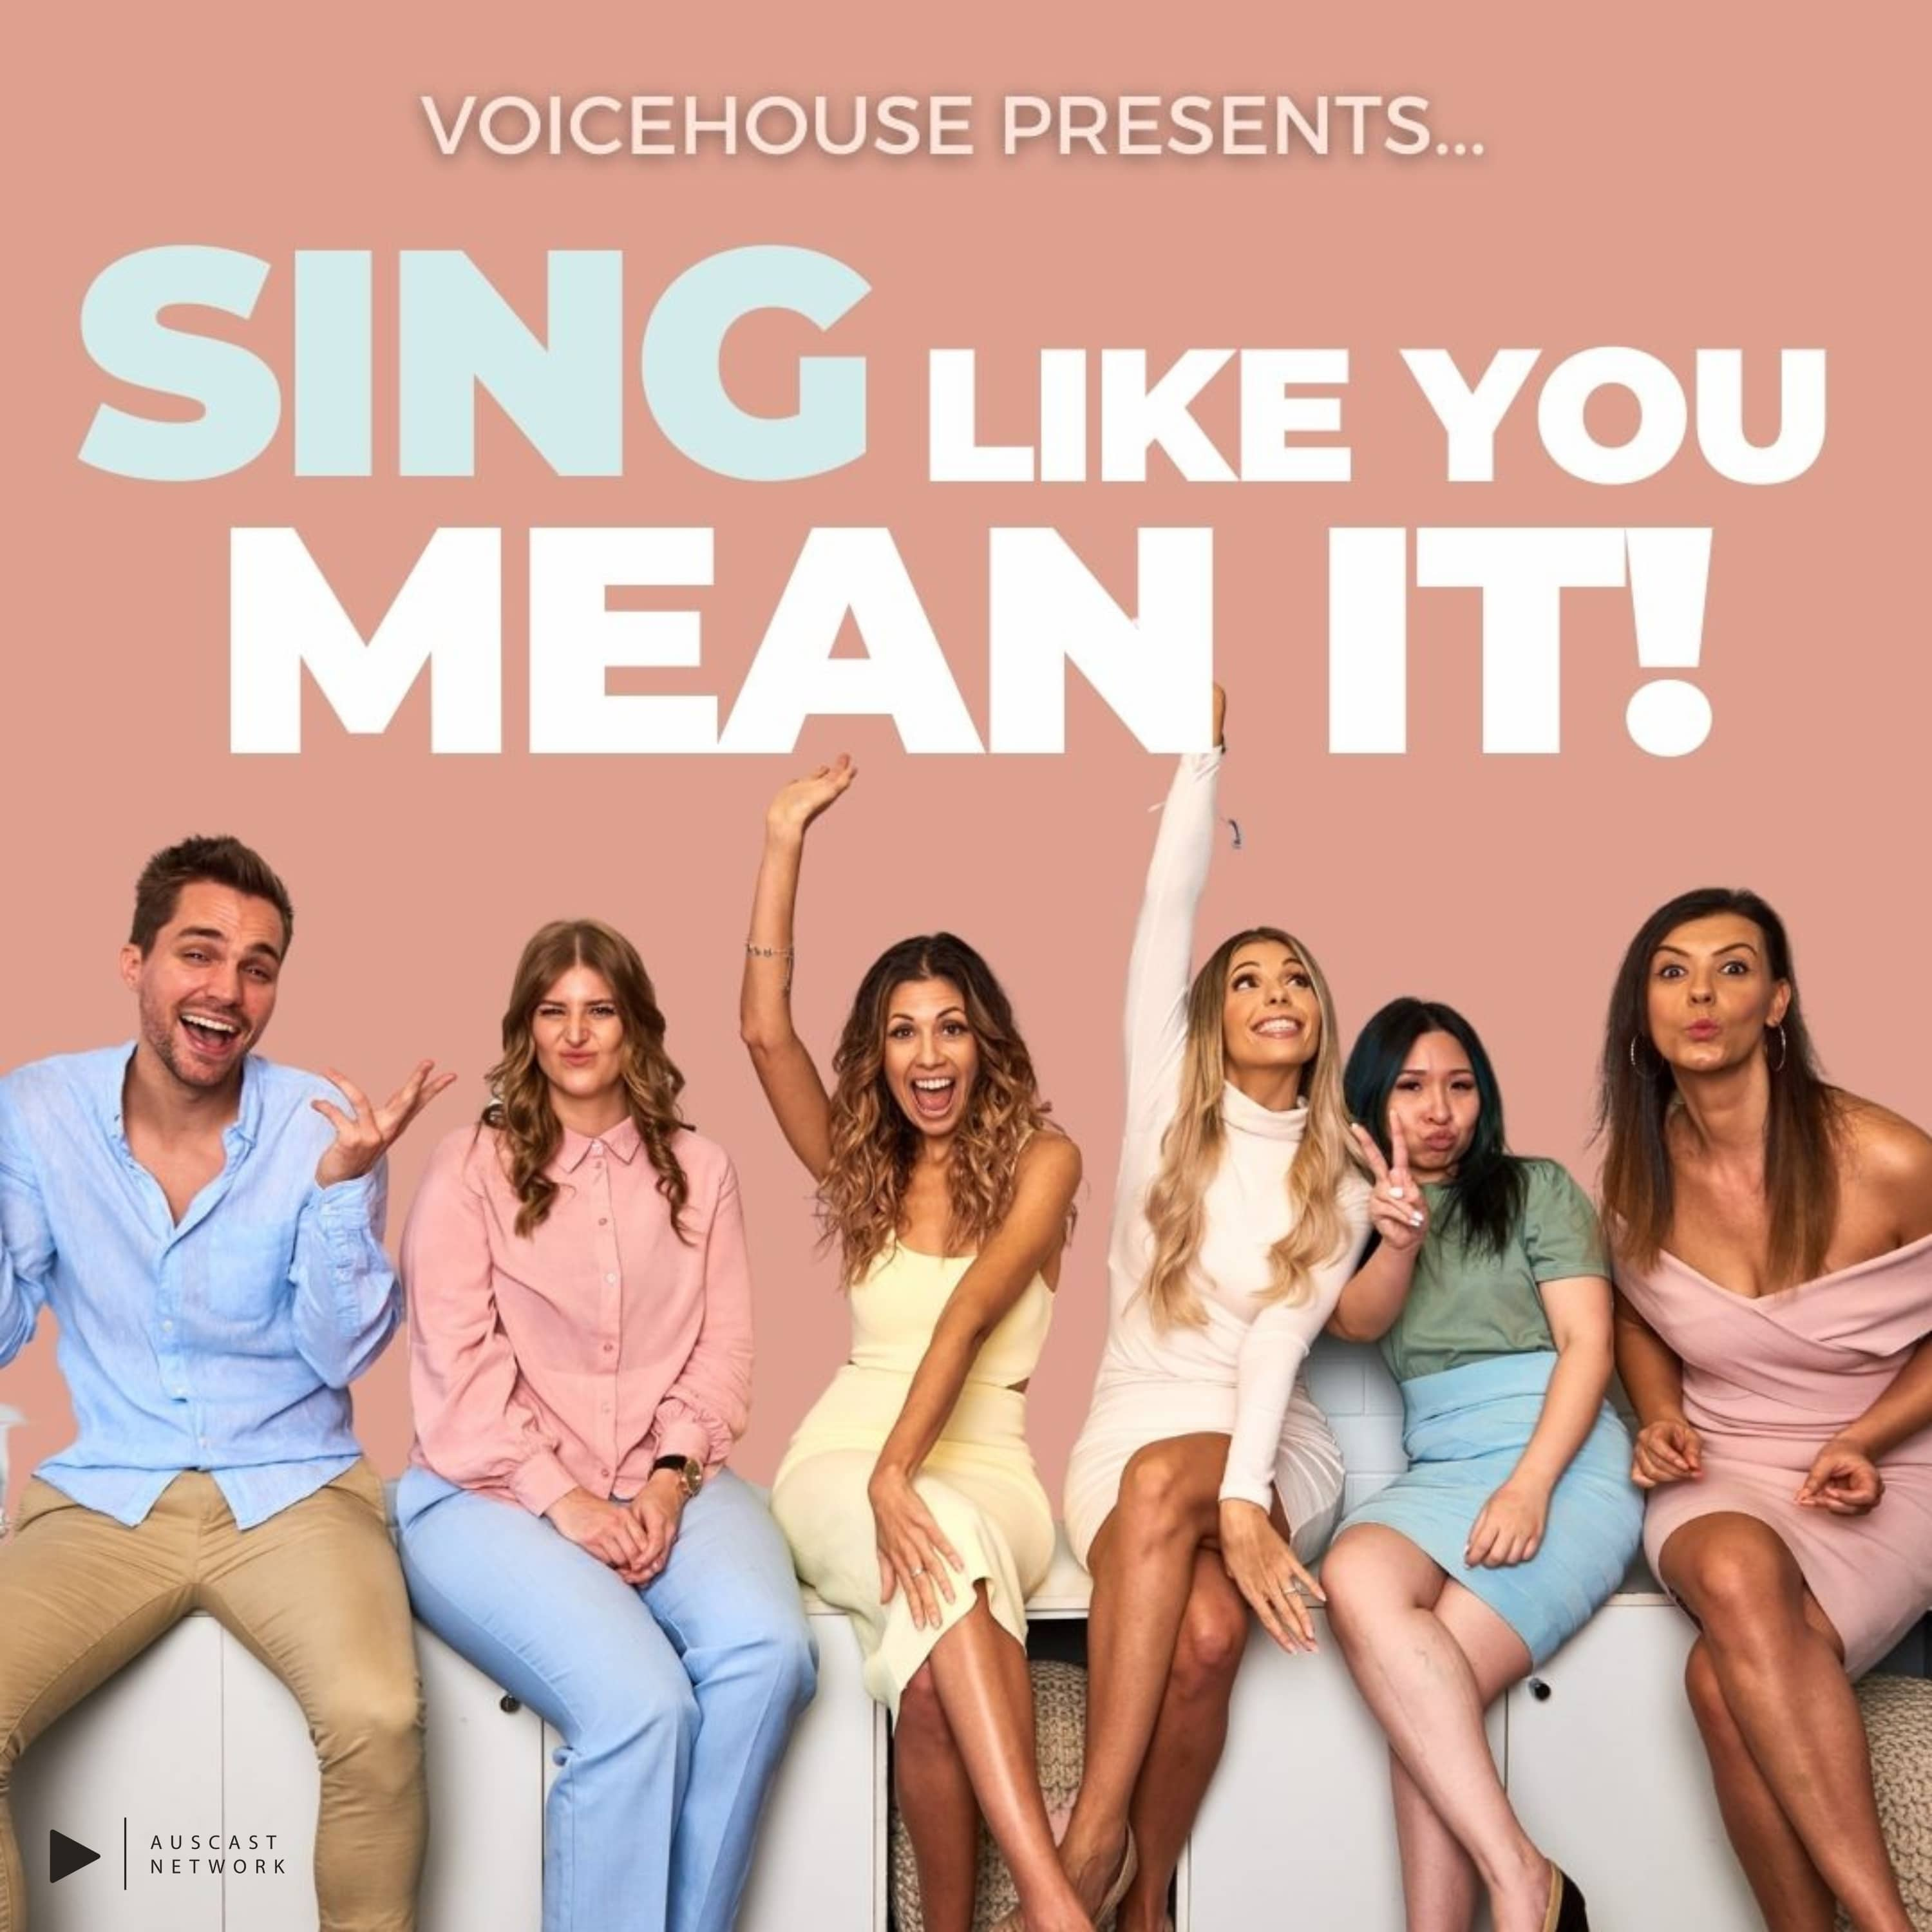 Sing Like You Mean It! is coming soon.. Subscribe now